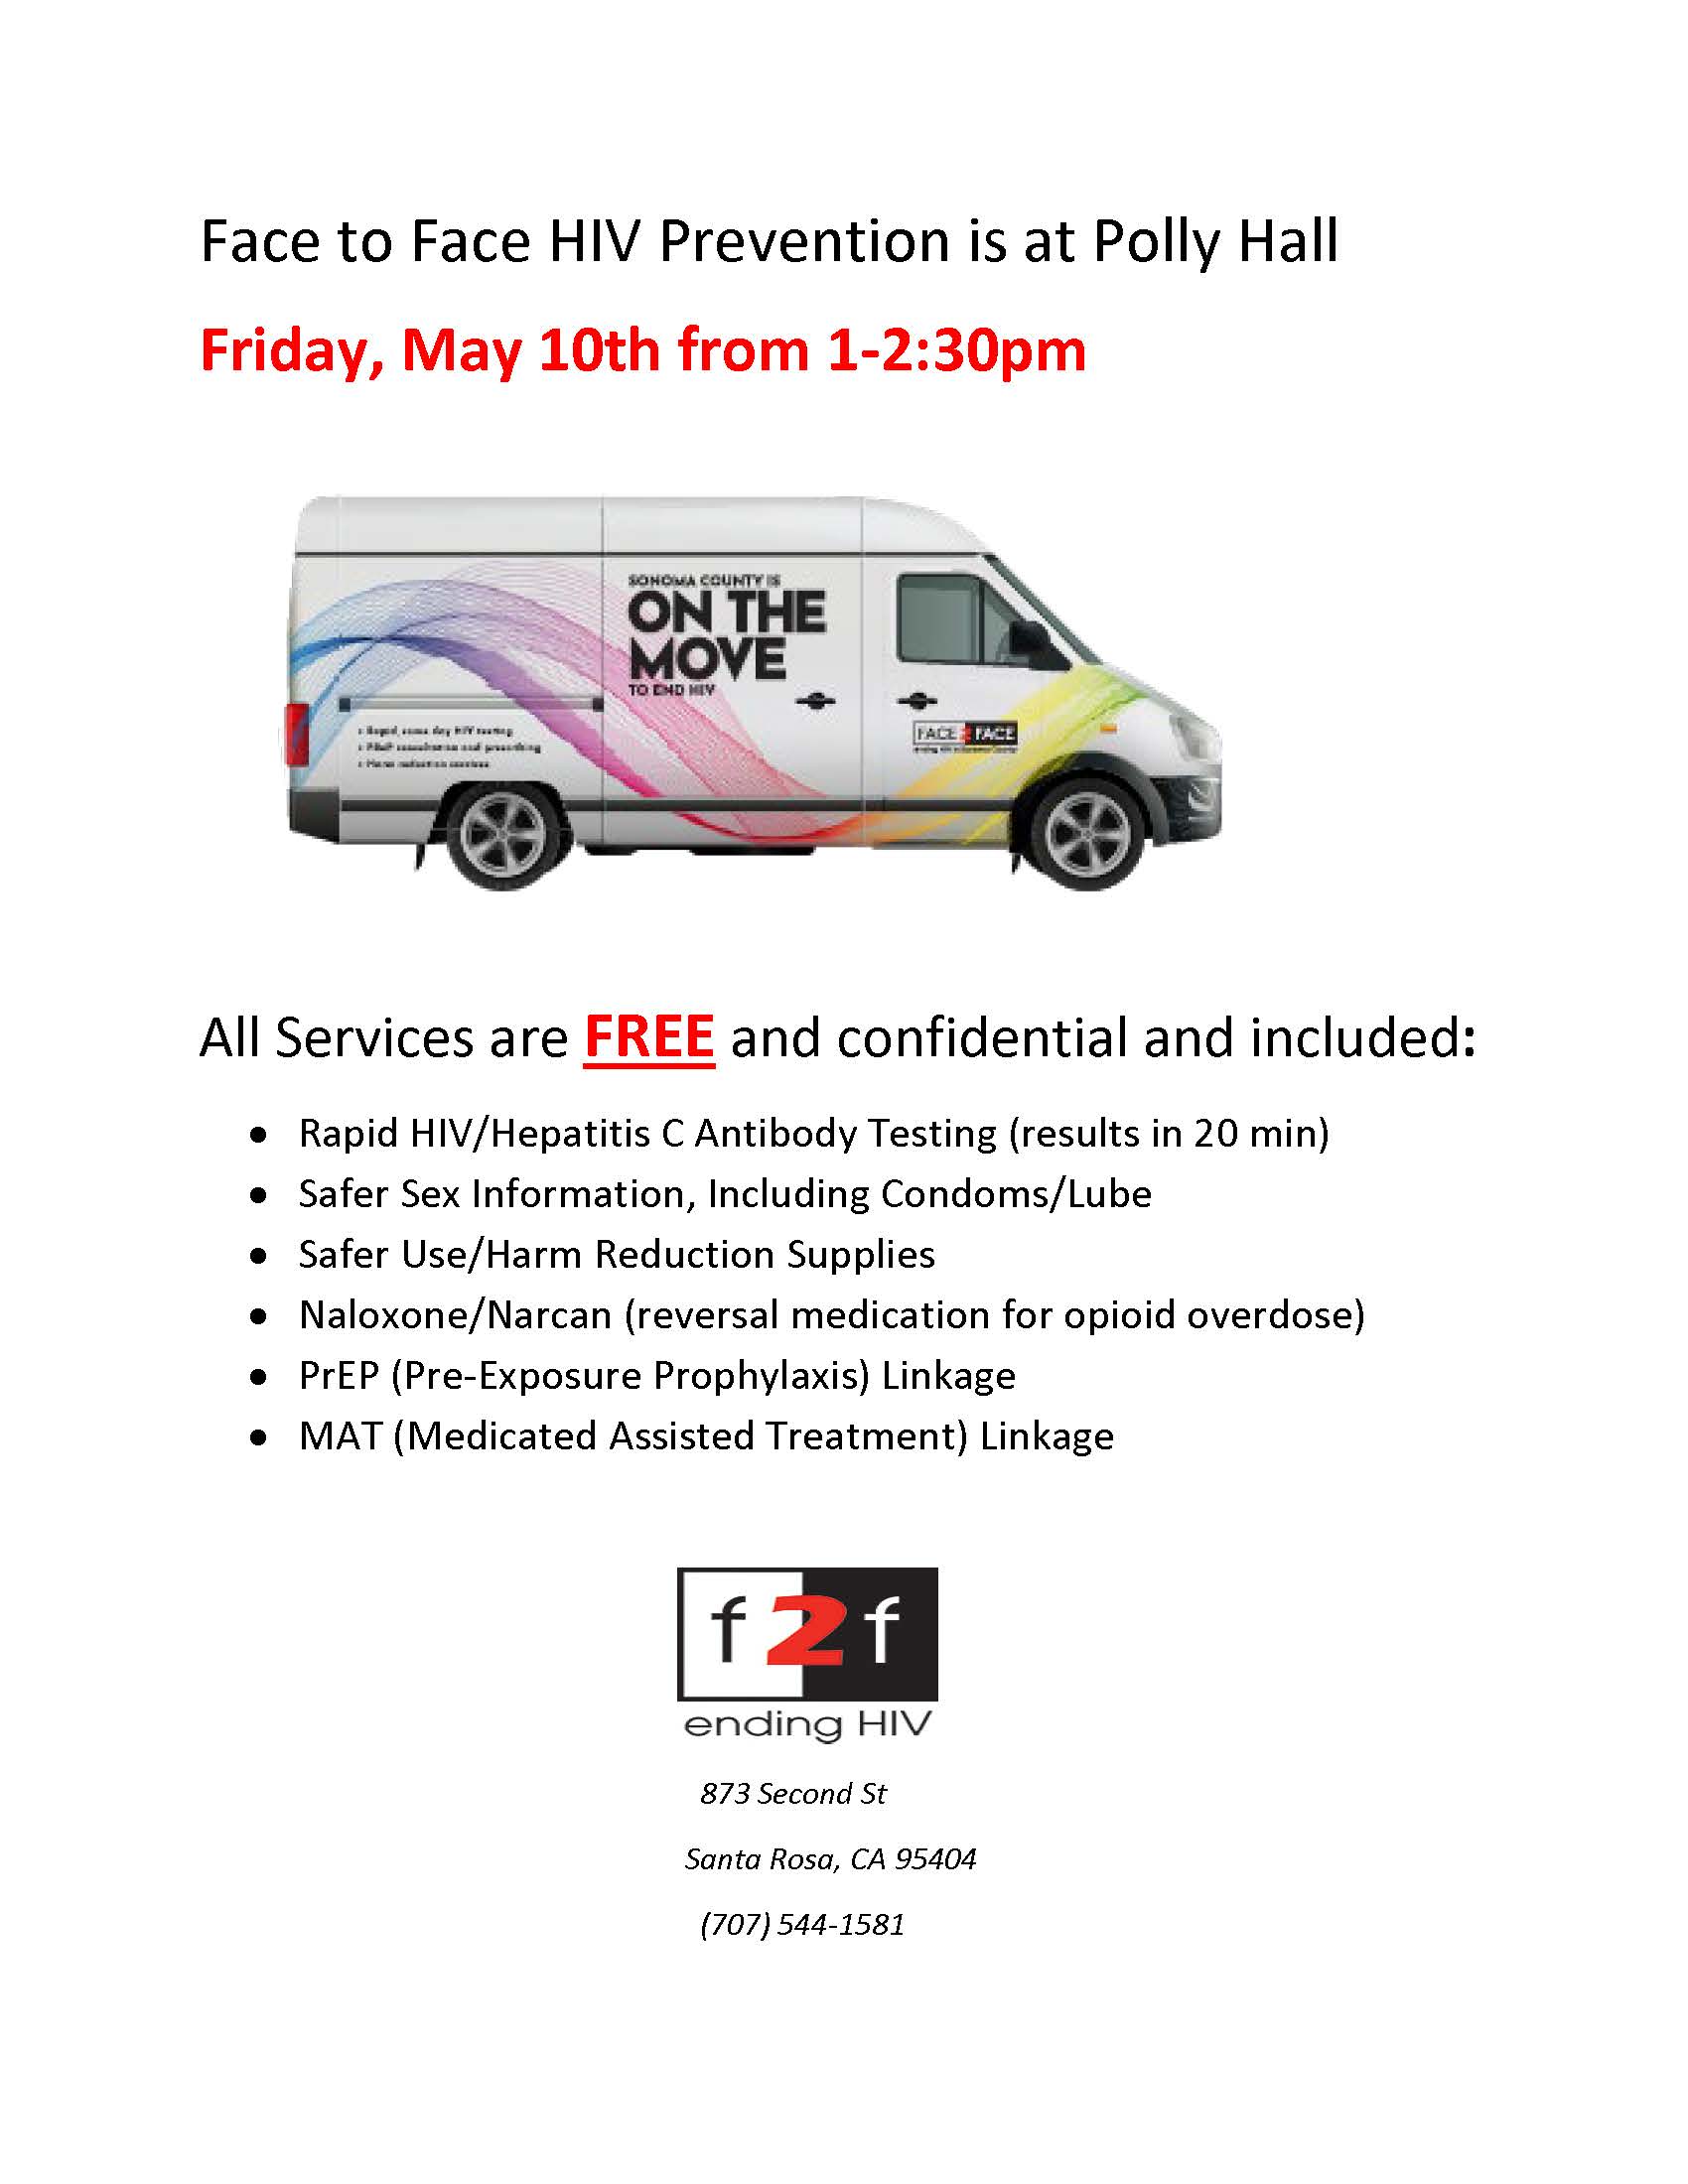 Face to Face HIV Prevention is at Polly Hall Friday, May 10th from 1-2:30pm. All Services are FREE and confidential and included: • Rapid HIV/Hepatitis C Antibody Testing (results in 20 min) • Safer Sex Information, Including Condoms/Lube • Safer Use/Harm Reduction Supplies • Naloxone/Narcan (reversal medication for opioid overdose) • PrEP (Pre-Exposure Prophylaxis) Linkage • MAT (Medicated Assisted Treatment) Linkage. Phone: (707) 544-1581